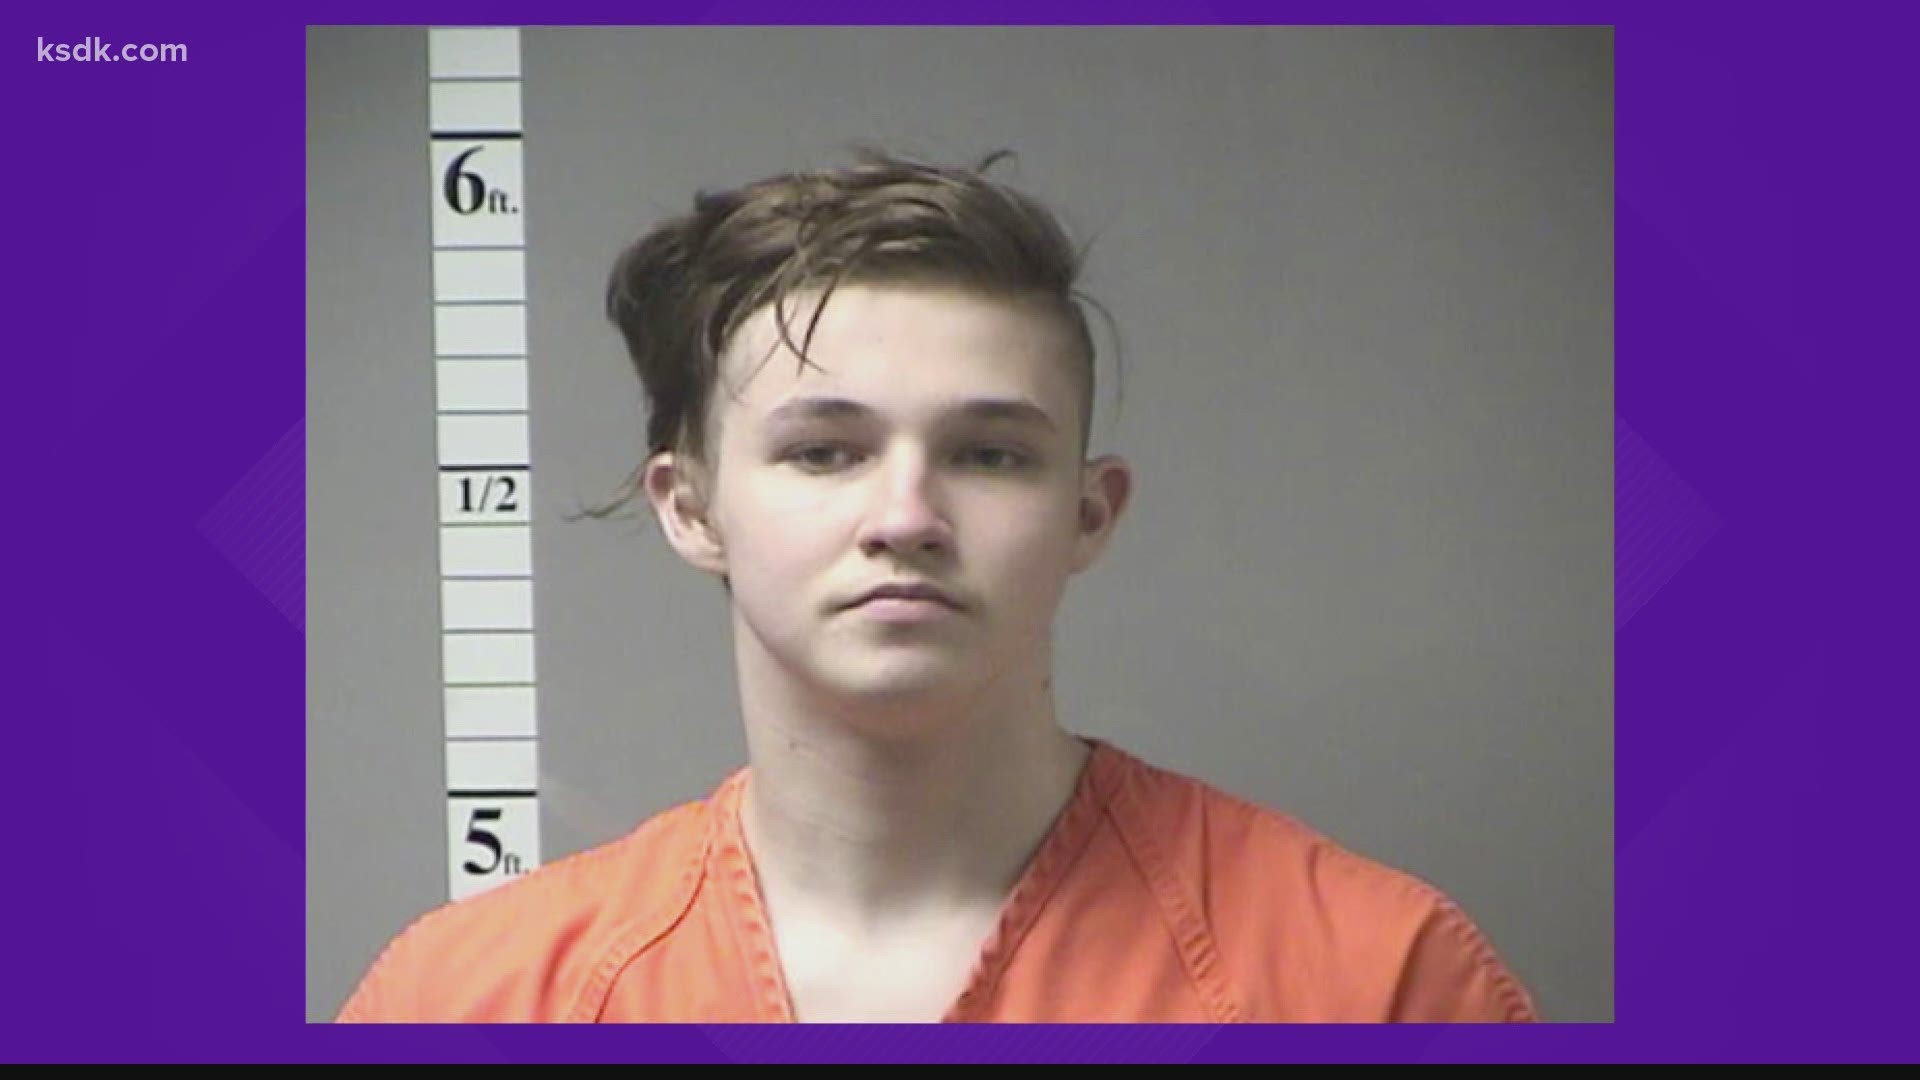 A judge ruled that Dylan Woolbright was "beyond rehabilitation under the juvenile code,” but an advocate said the system has failed him and countless others